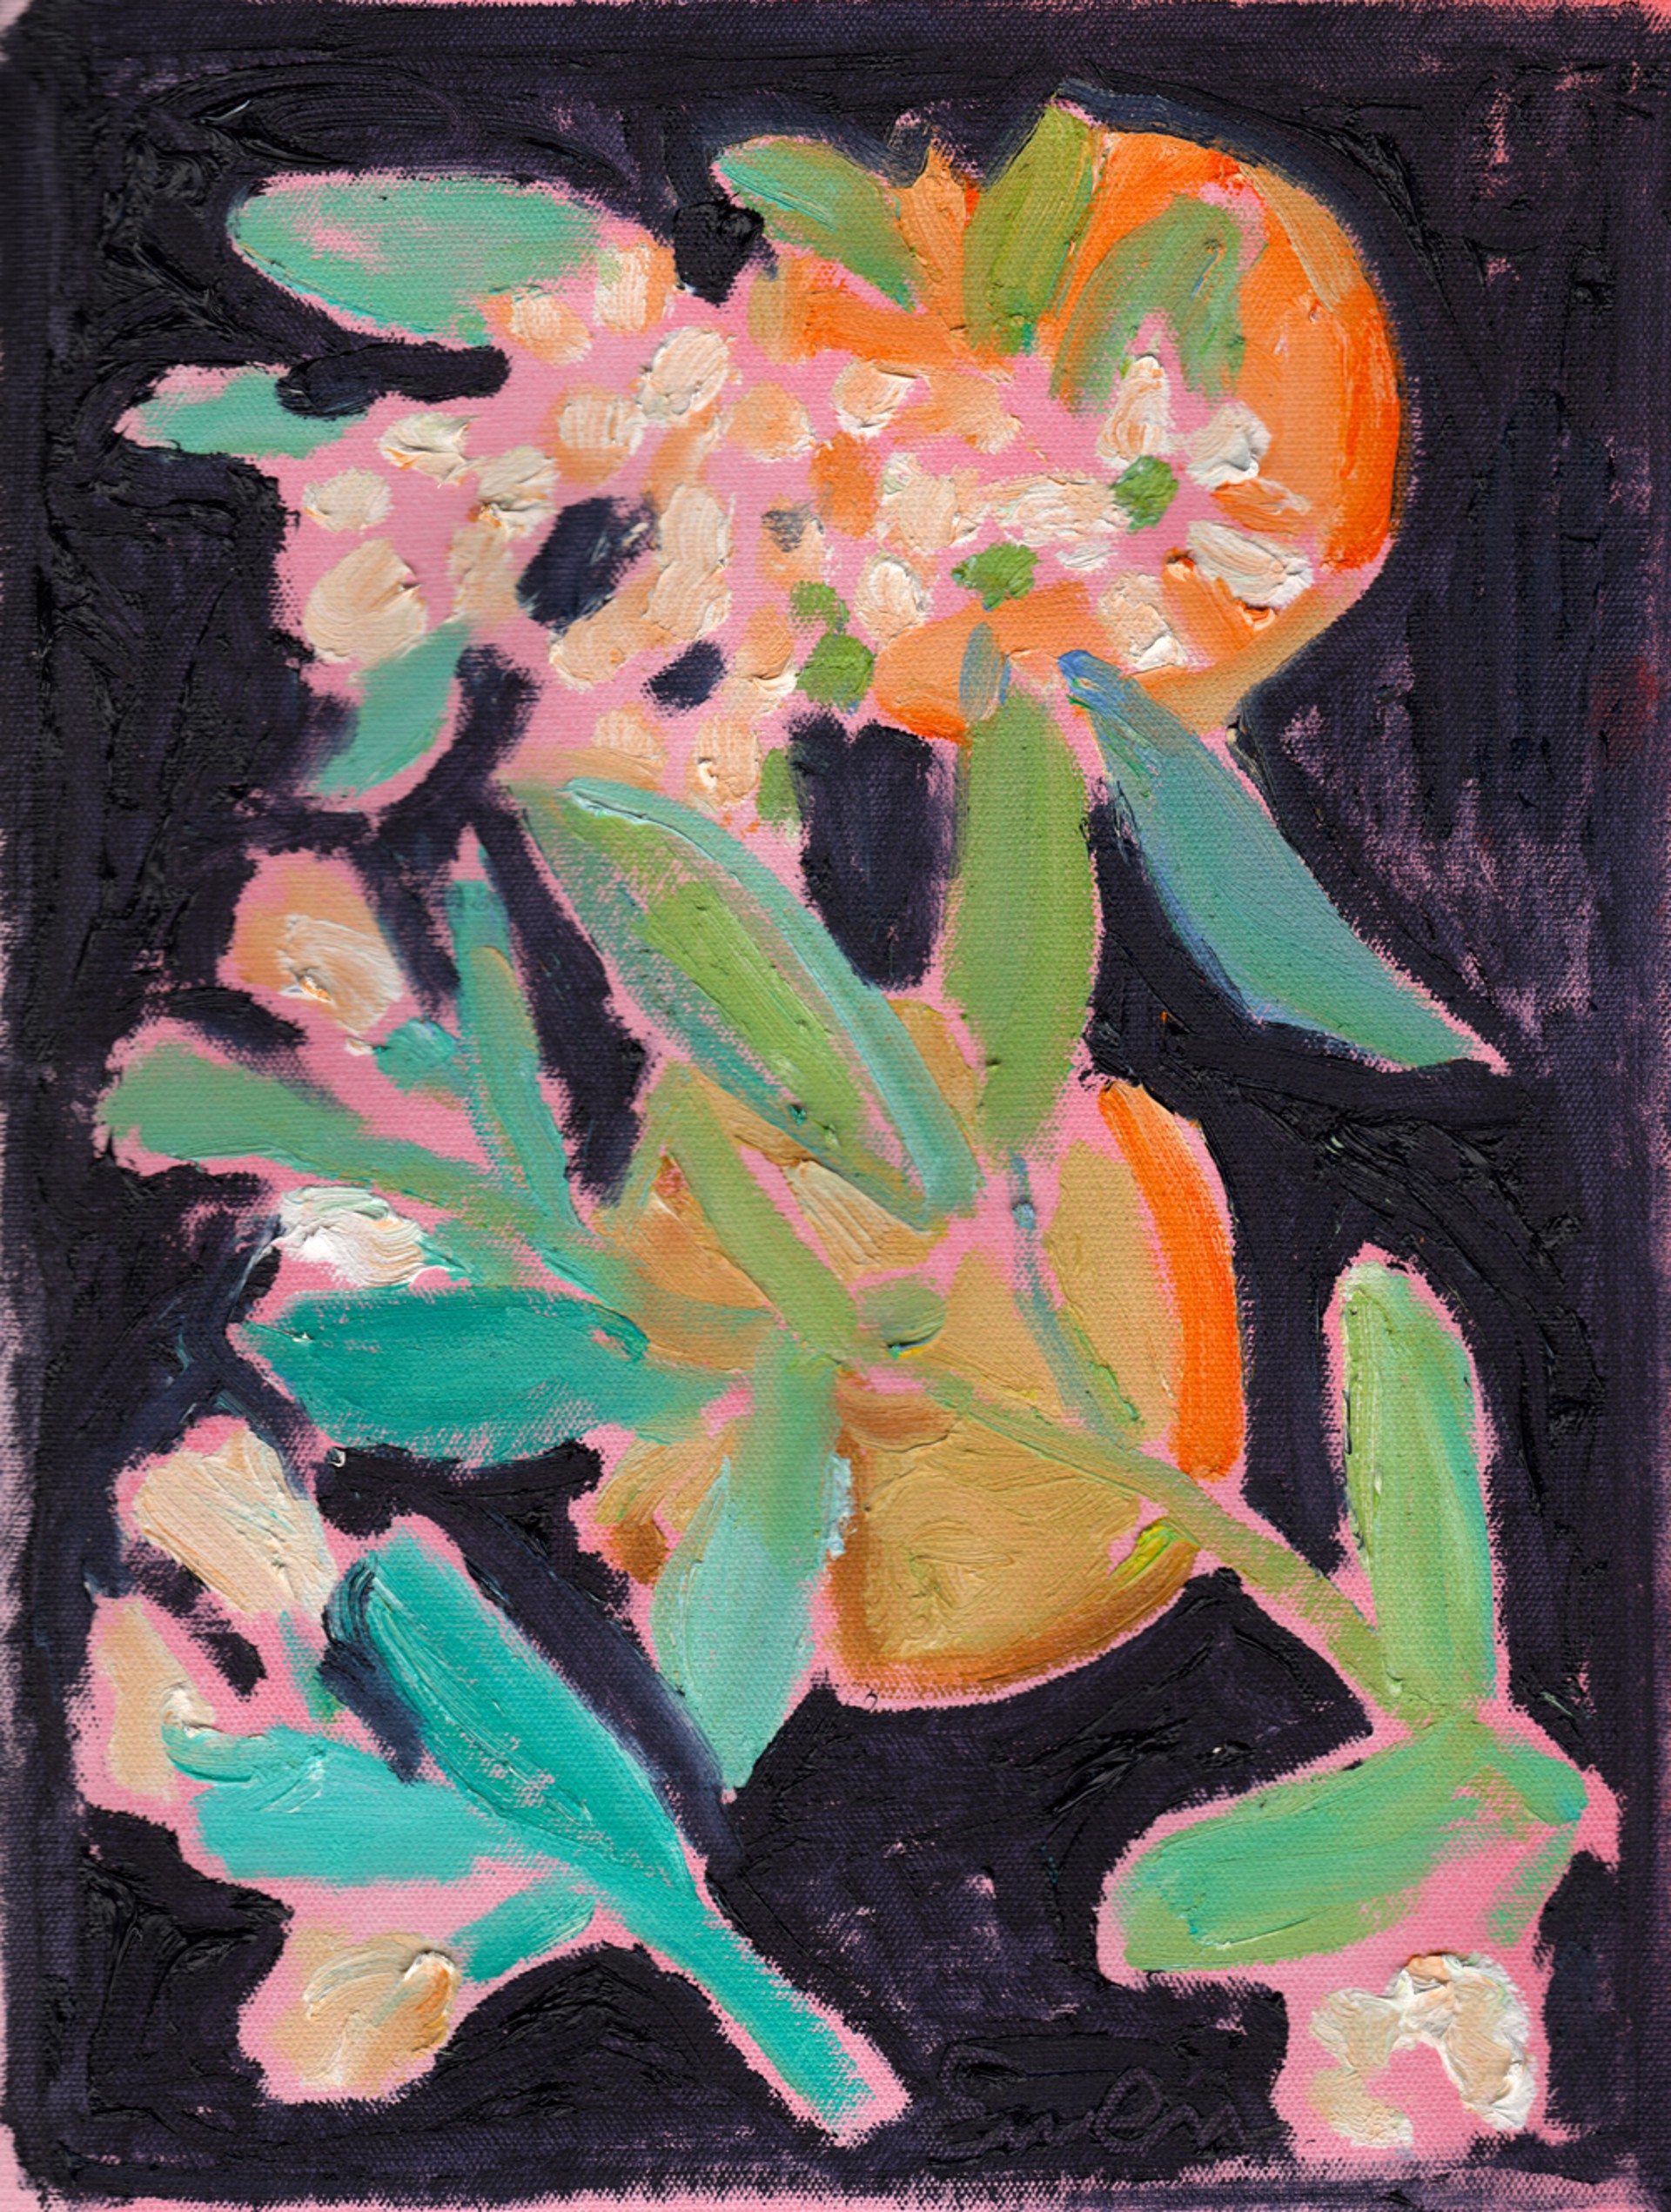 Citrus Blossom 5 by Anne-Louise Ewen